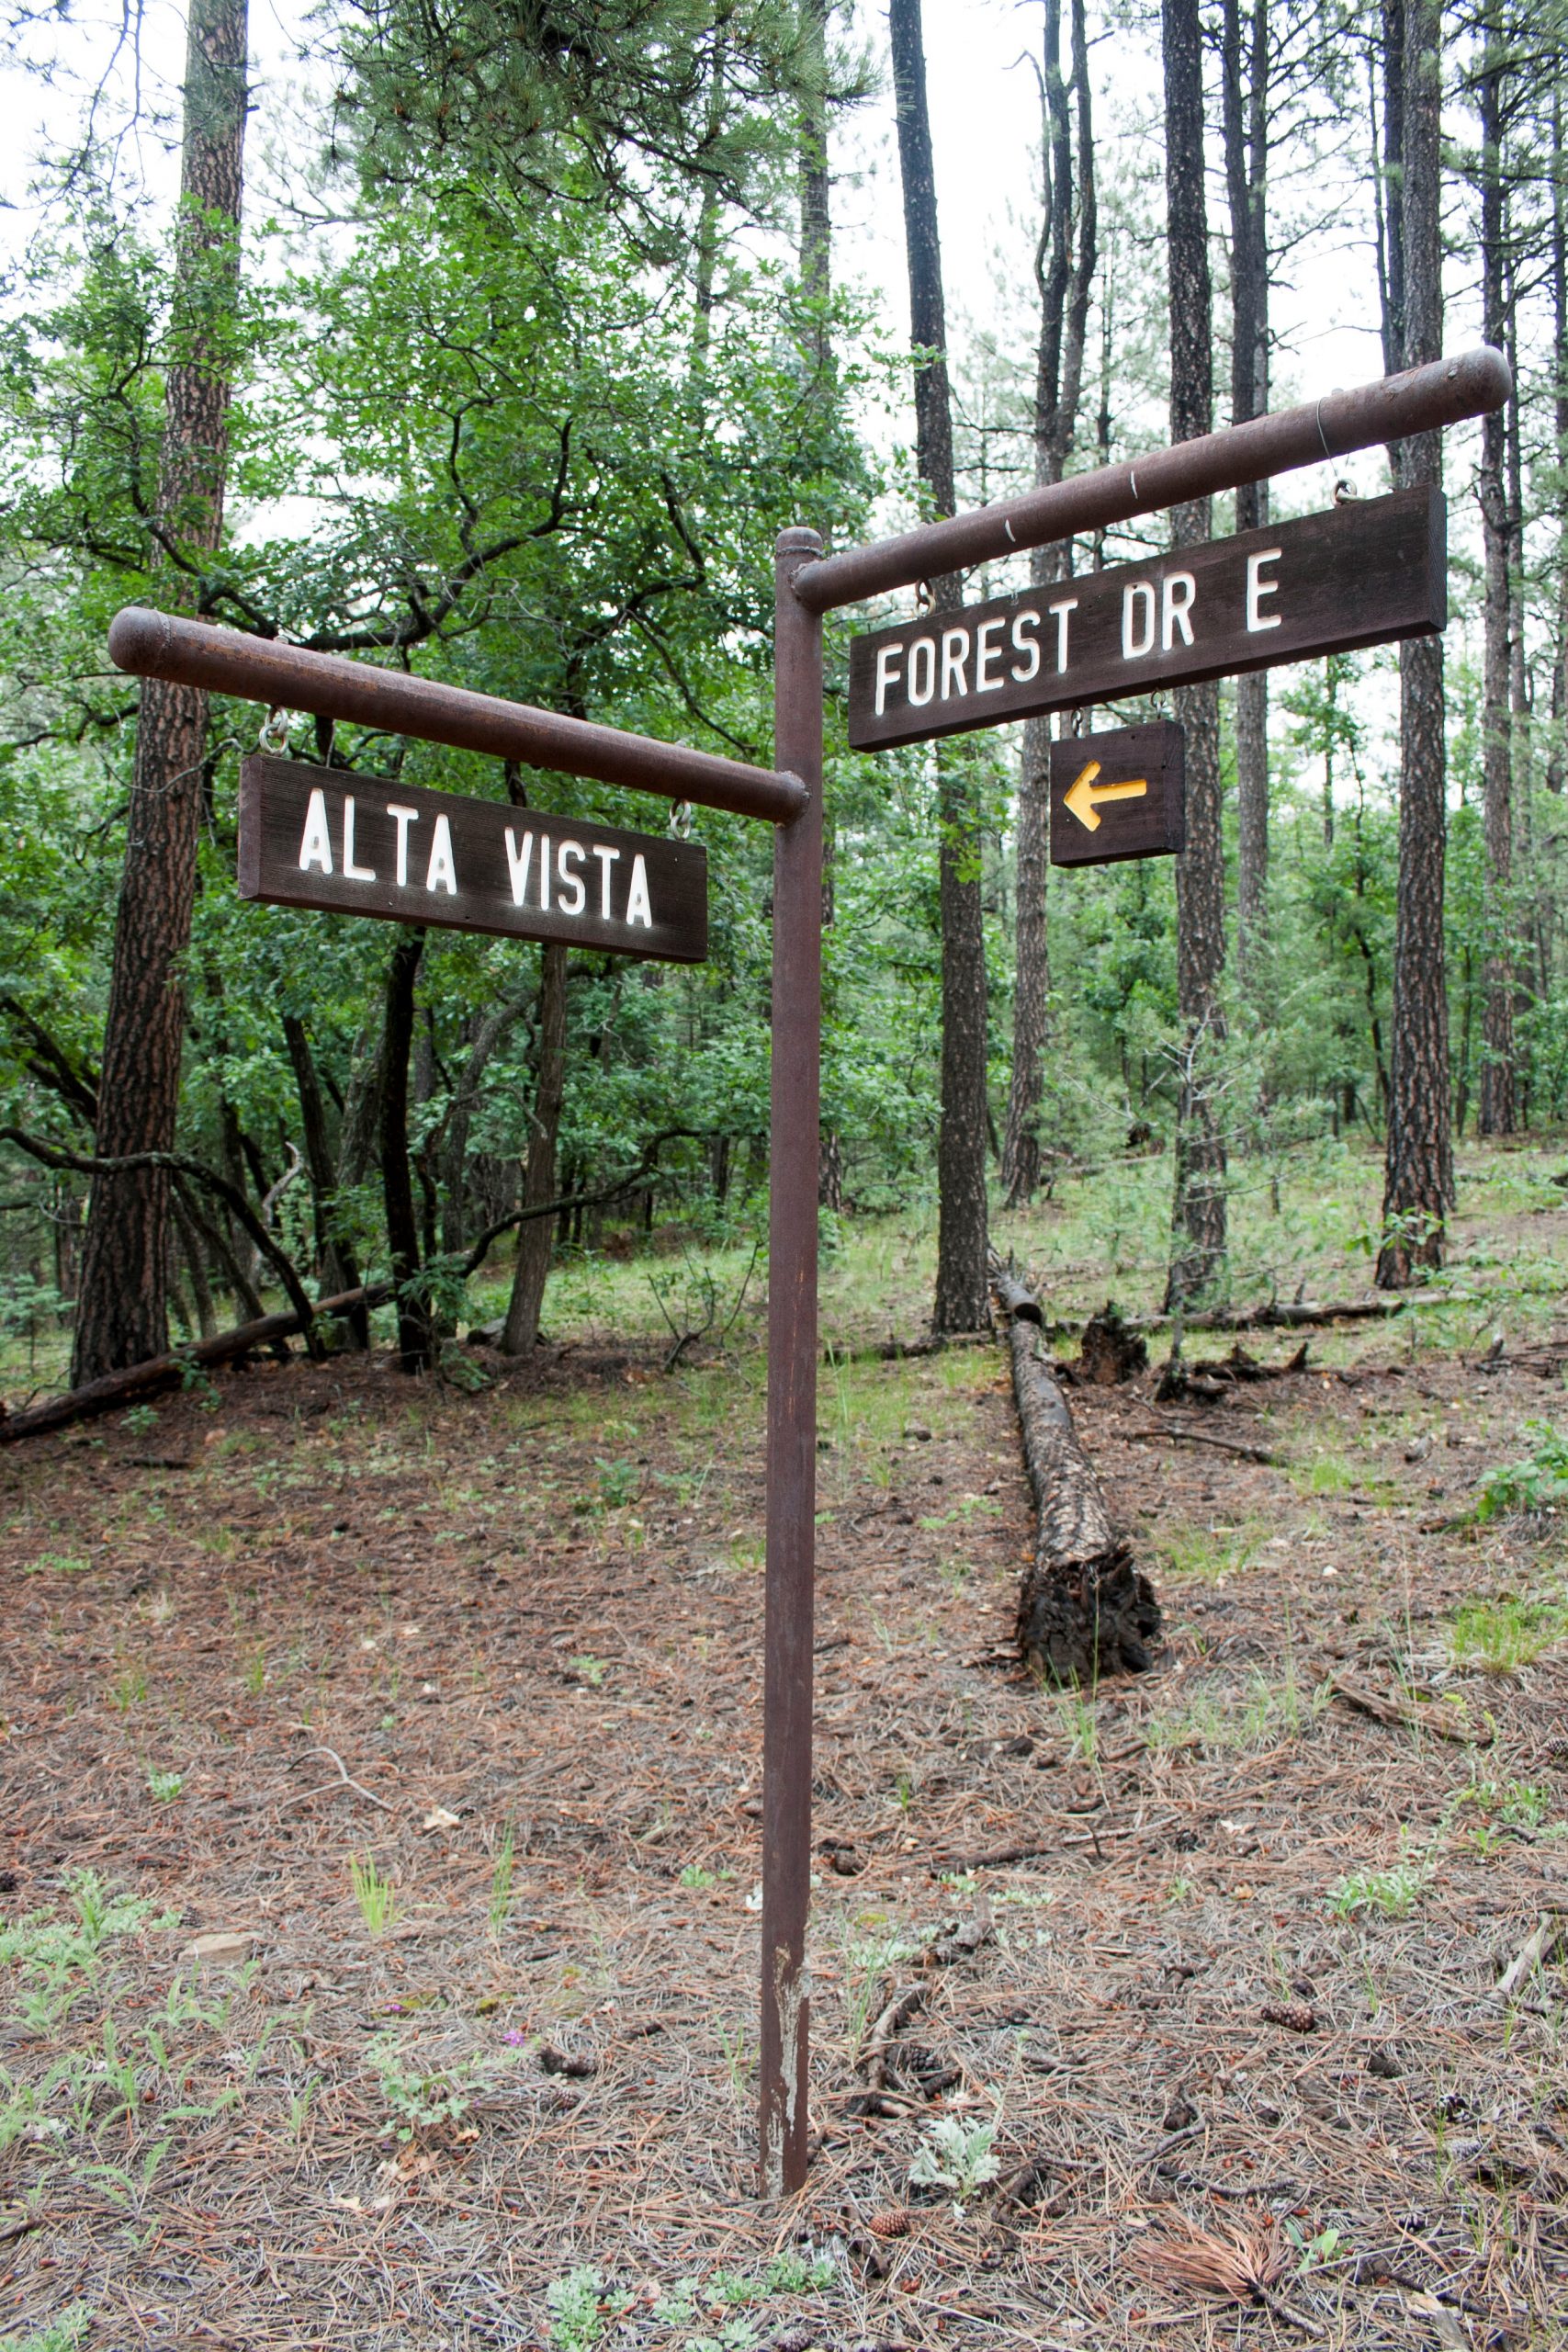 Alta Vista and Forest Dr E Intersection located in the mountains near Santa Fe and Taos